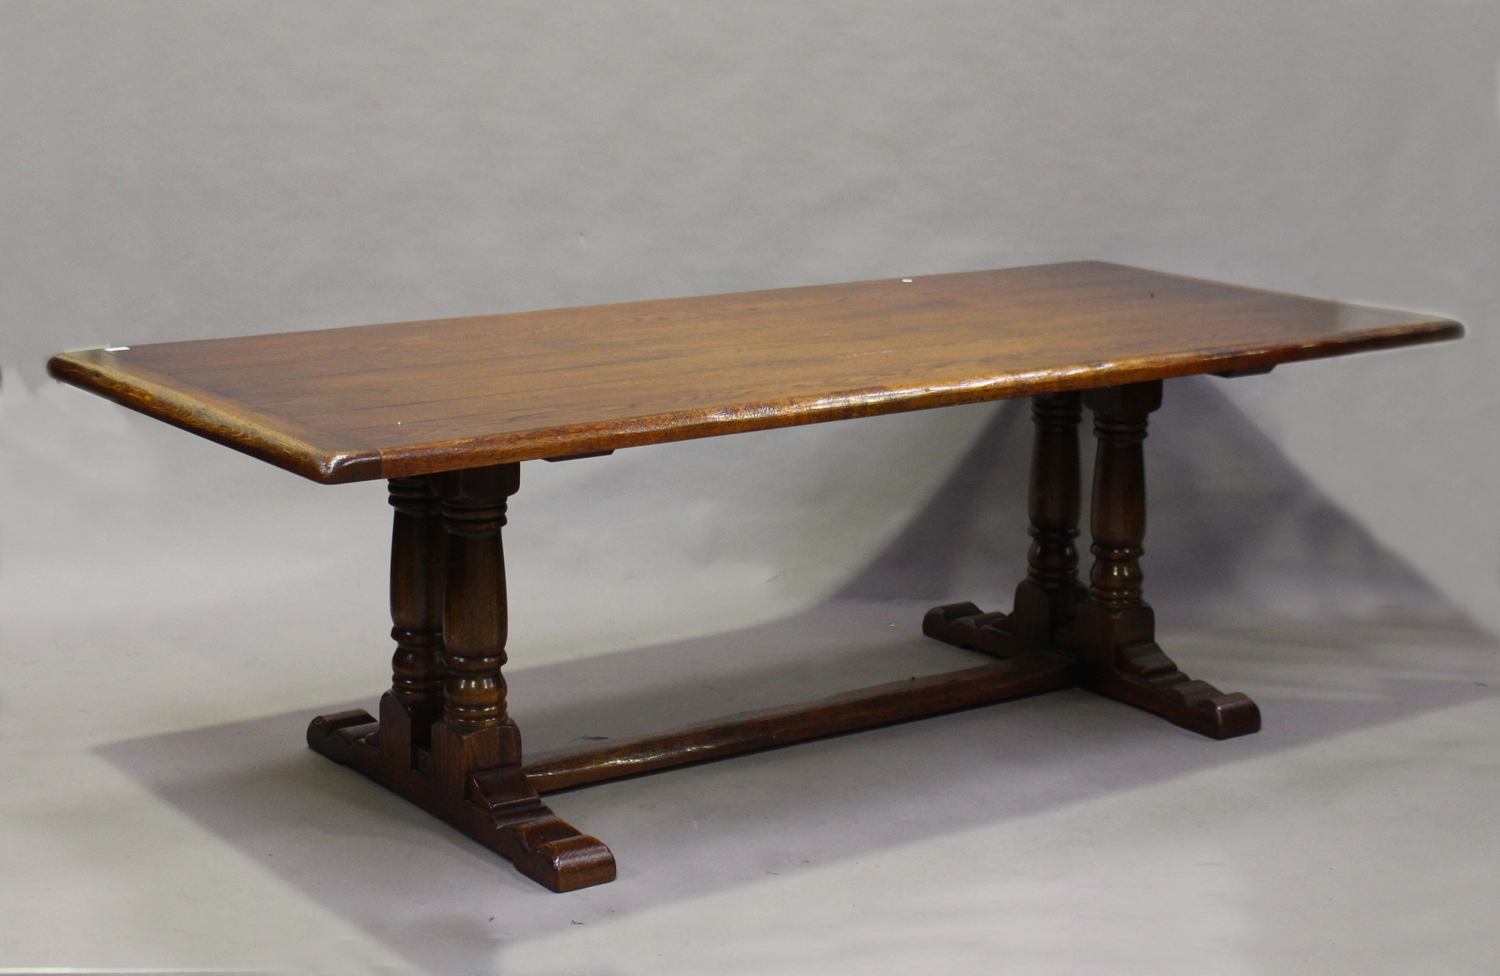 A modern Jacobean Revival oak refectory dining table by the Royal Oak Furniture Company, the seven-